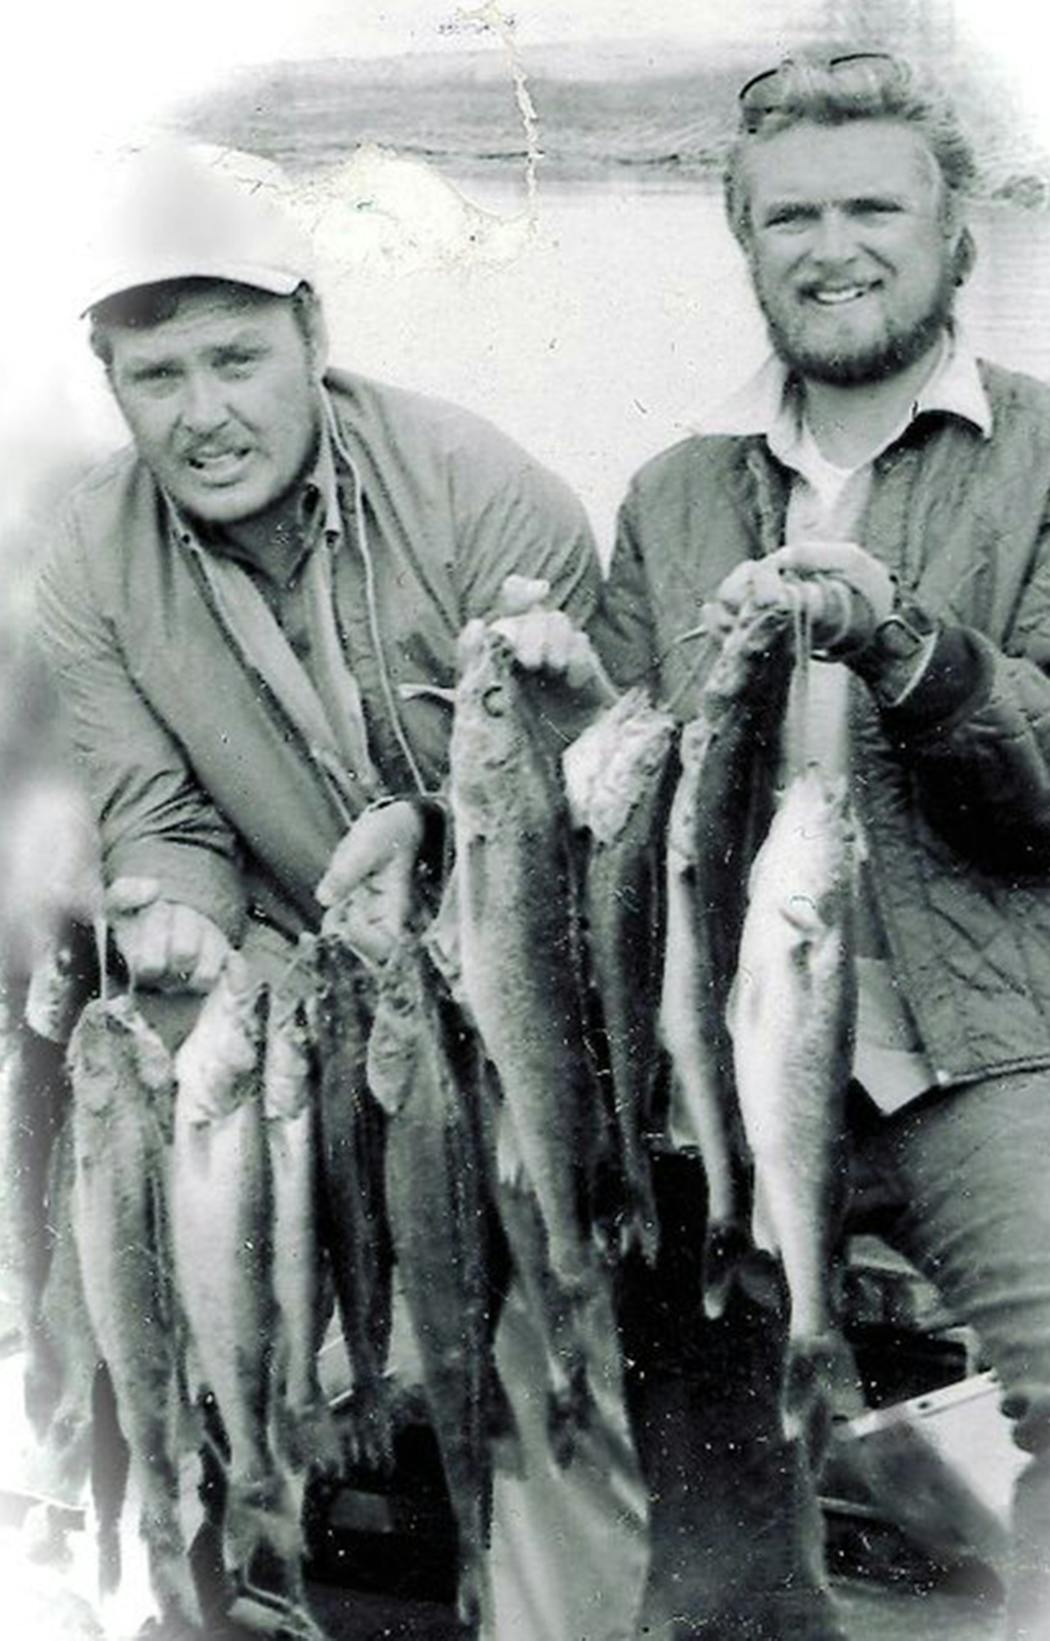 The Lindner brothers had an earth-shattering idea that change fishing forever: the Lindy Rig.